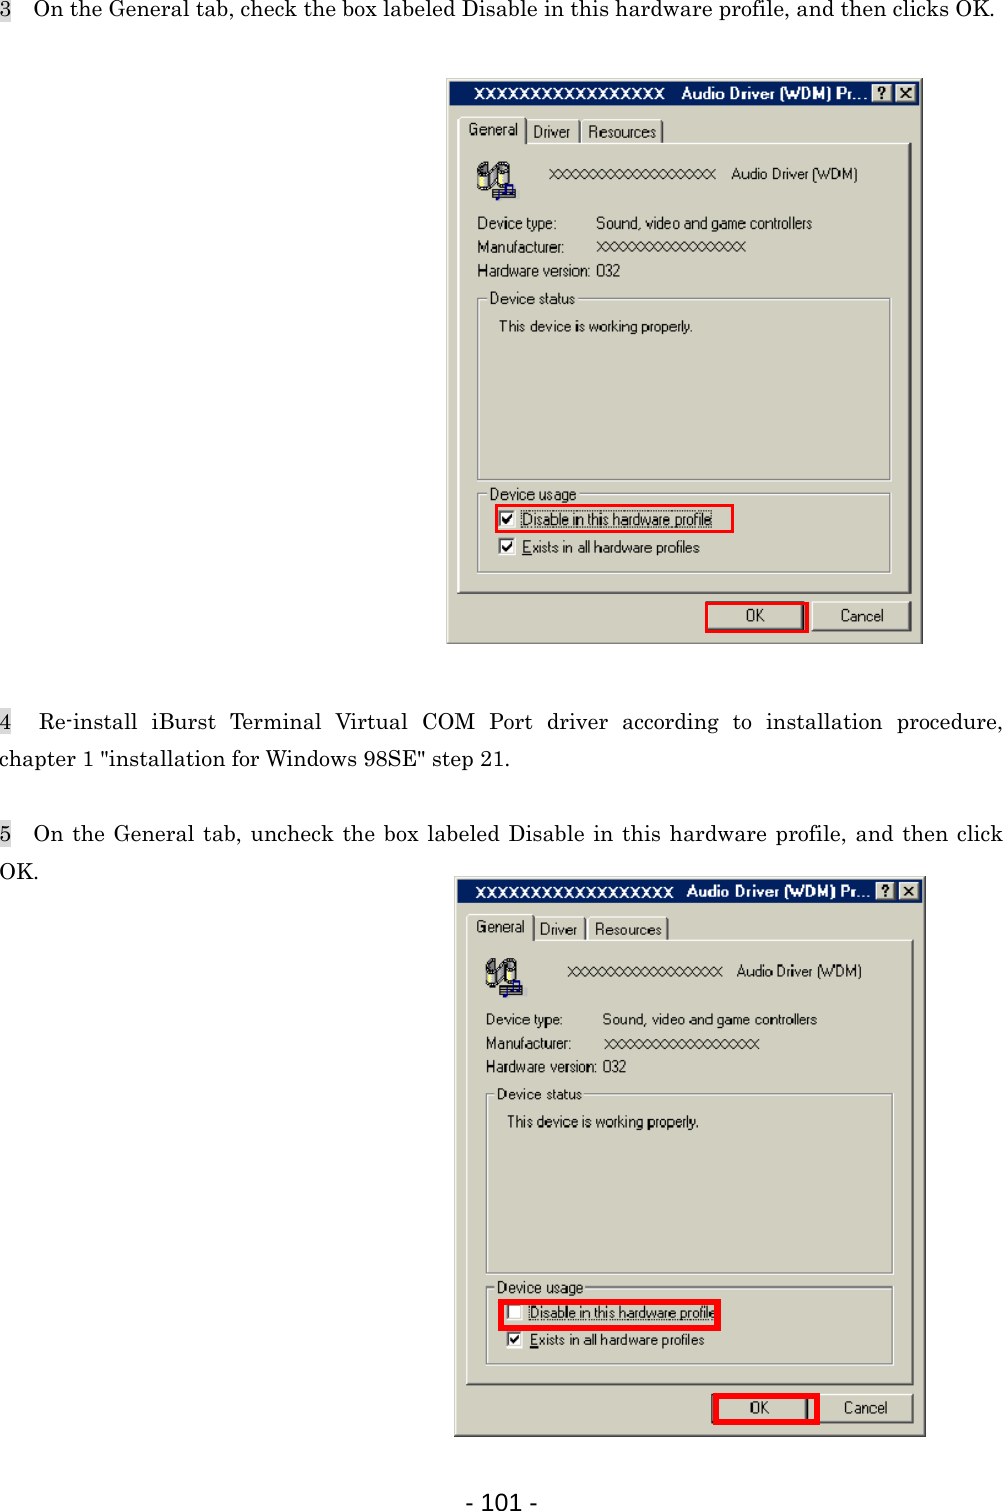 3    On the General tab, check the box labeled Disable in this hardware profile, and then clicks OK.                   4  Re-install iBurst Terminal Virtual COM Port driver according to installation procedure,  chapter 1 &quot;installation for Windows 98SE&quot; step 21.  5   On the General tab, uncheck the box labeled Disable in this hardware profile, and then click OK.                - 101 -  